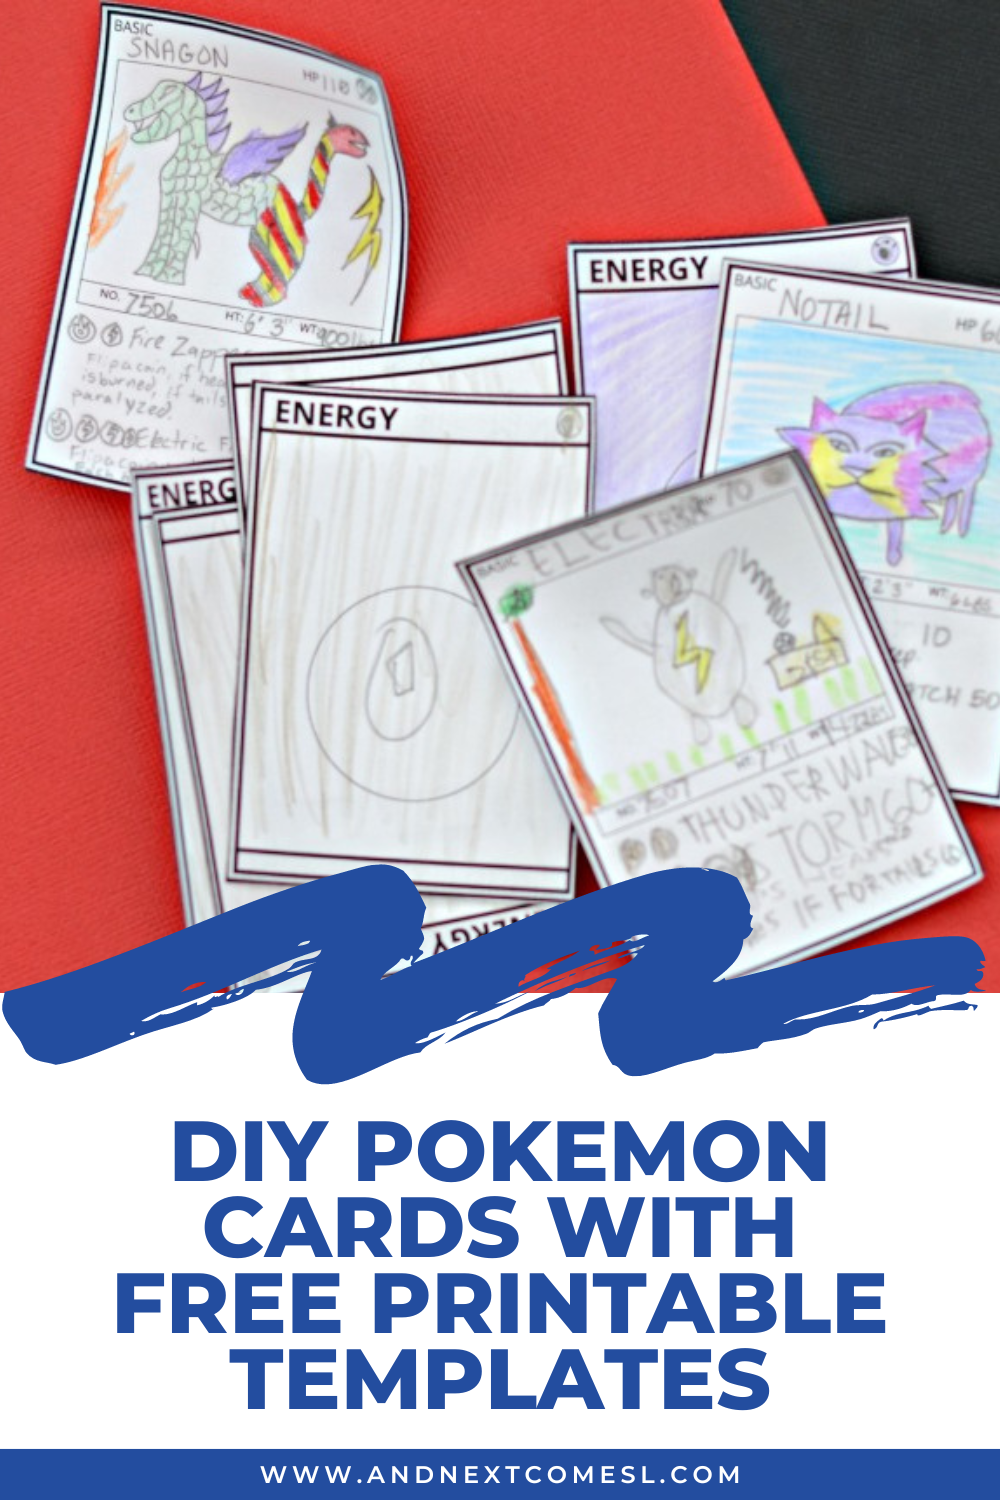 Make your own Pokemon cards with these free printable DIY Pokemon card templates